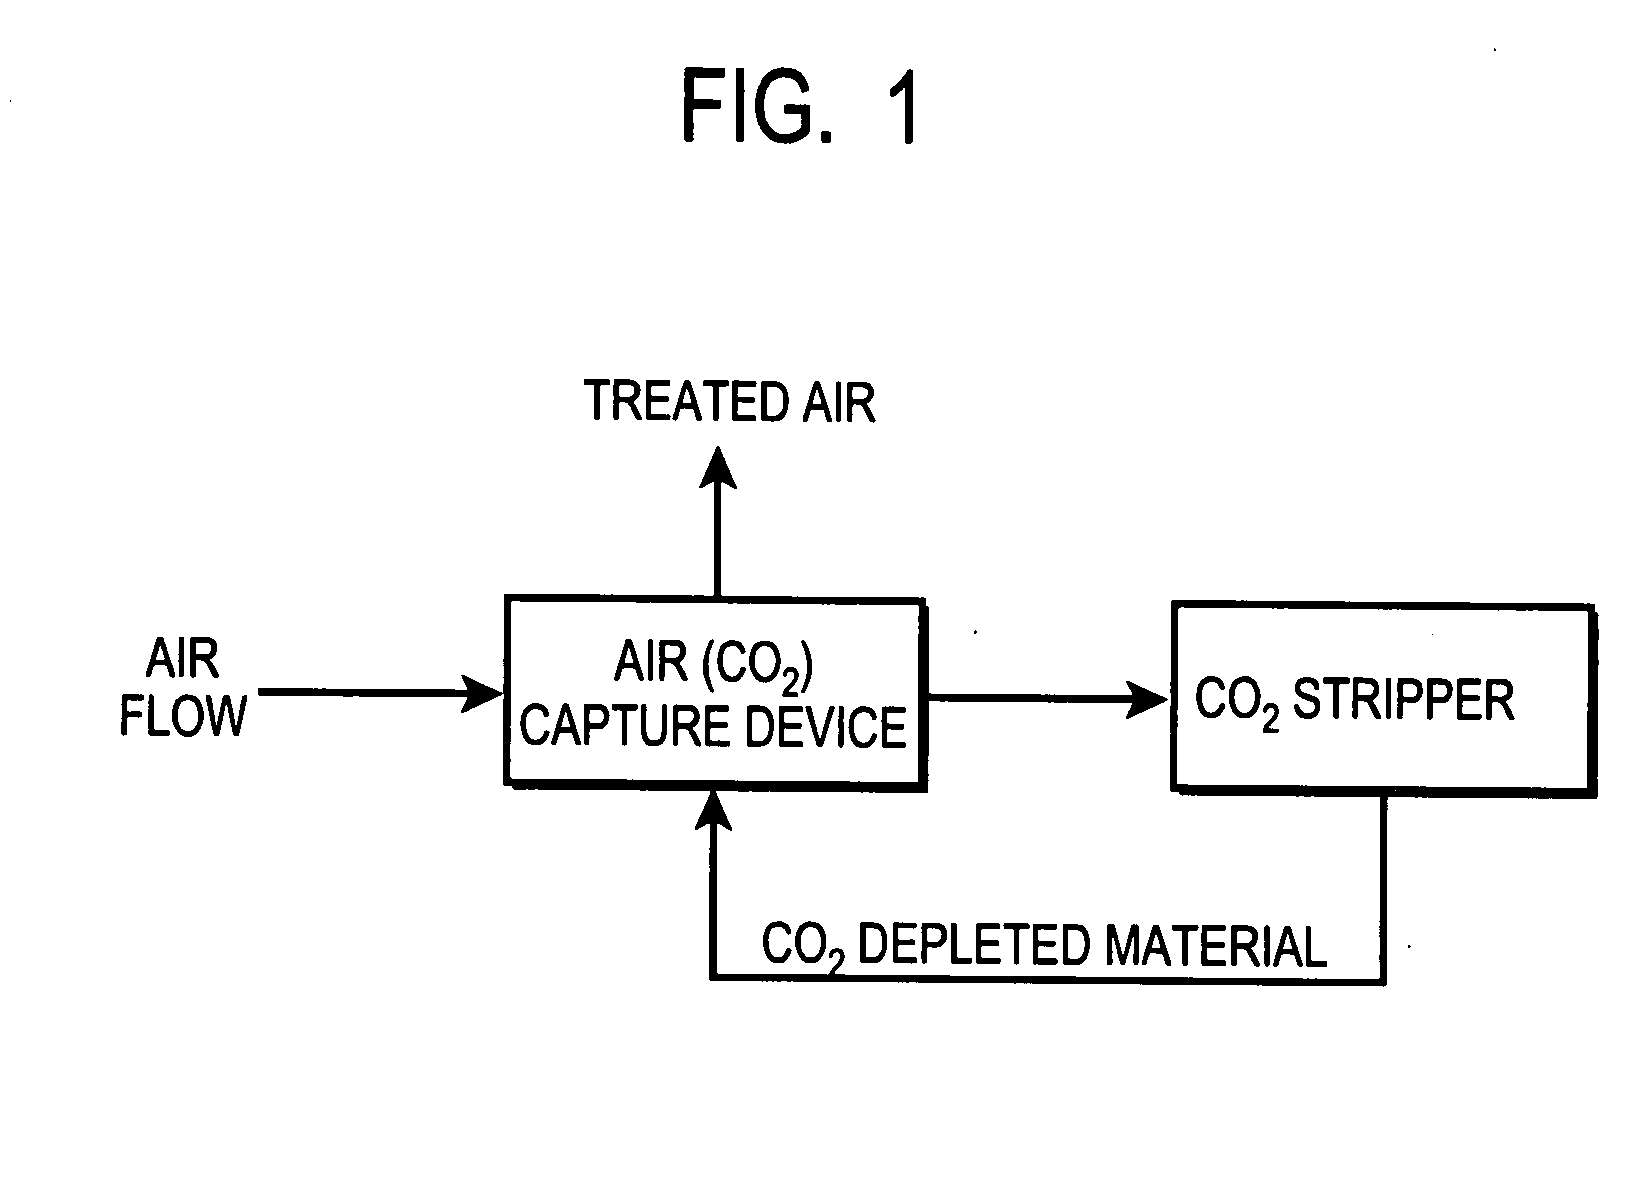 Air collector with functionalized ion exchange membrane for capturing ambient co2